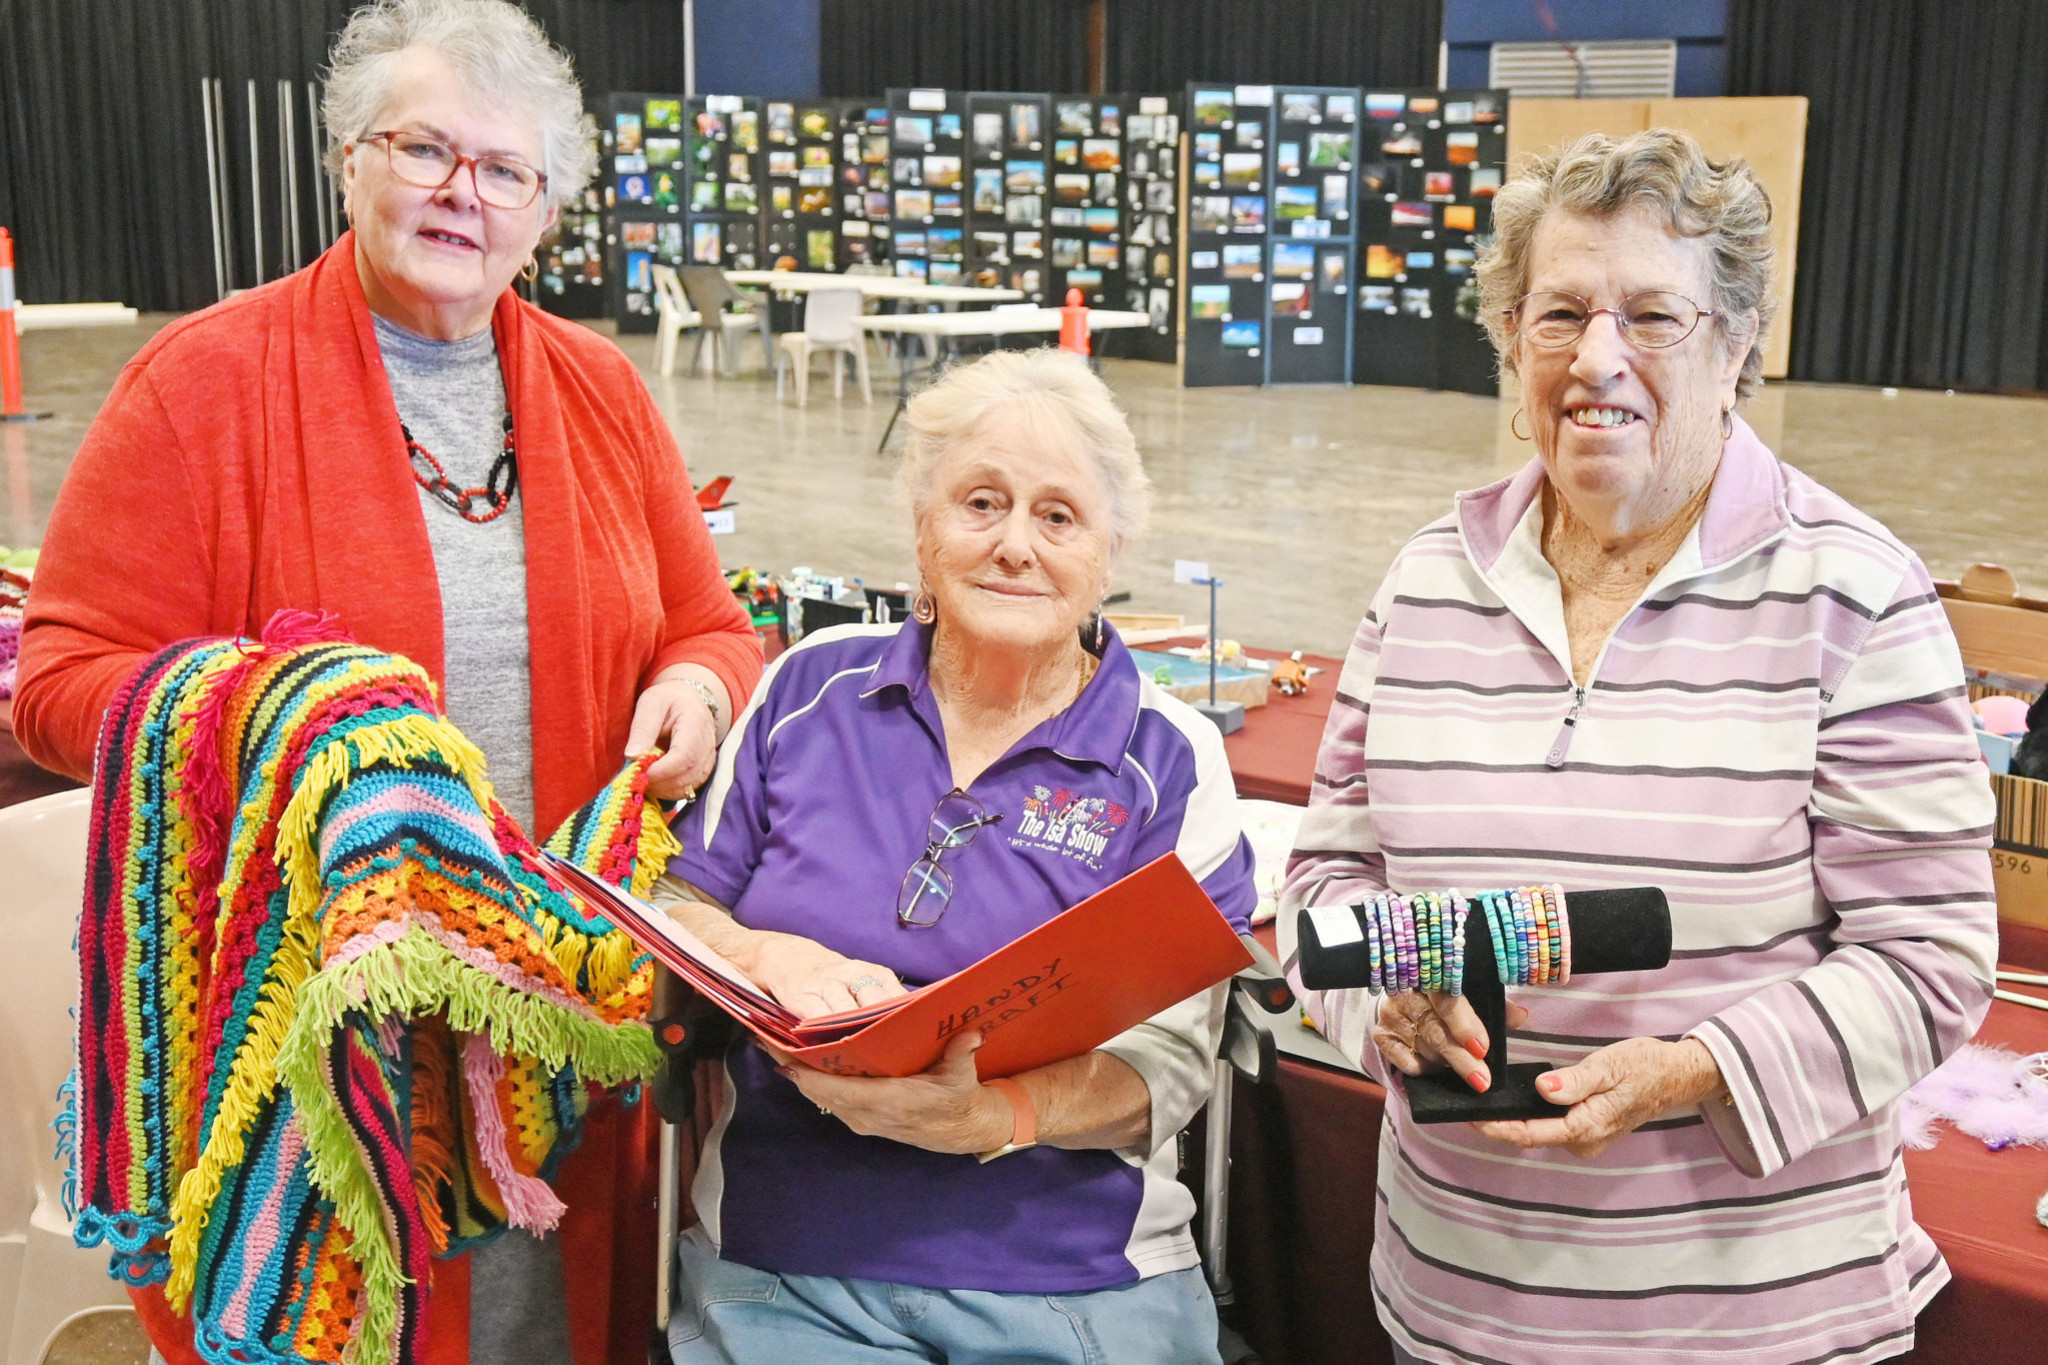 Spotted in the Buchanan Park pavilion on Tuesday morning were Bev Wilmot (judge) and Mount Isa Agriculture Show Society life members Caryll Evans and Edna Russell, who are also show stewards.